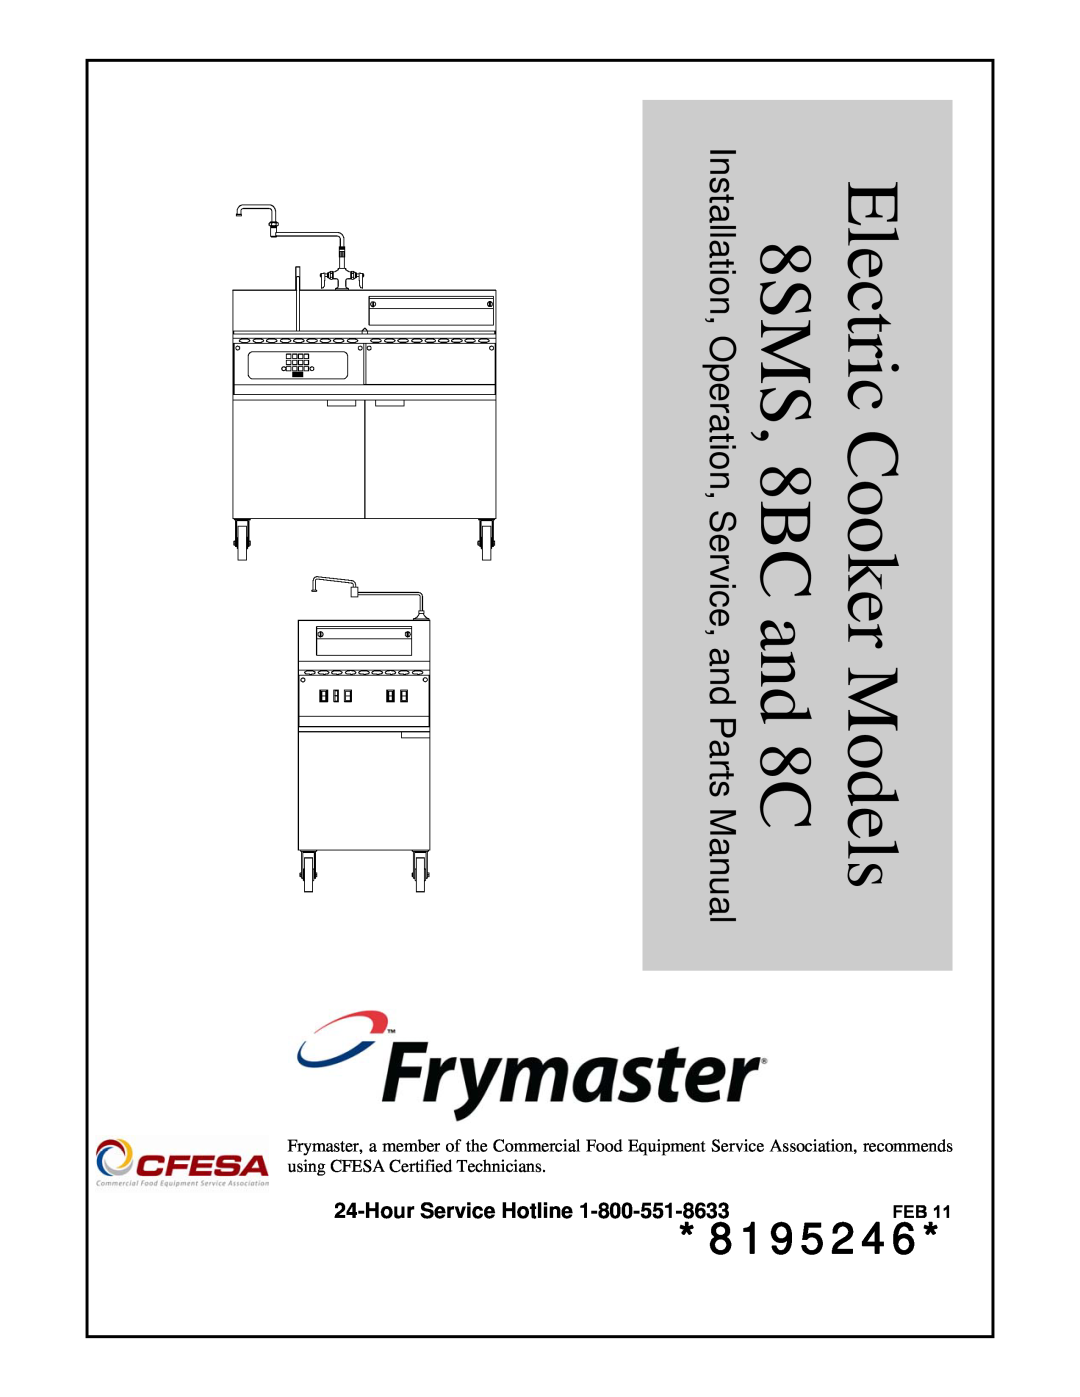 Frymaster 8BC, 8C specifications 8SMS Spaghetti Magic System, Frymaster, Models, Standard Features, Options 